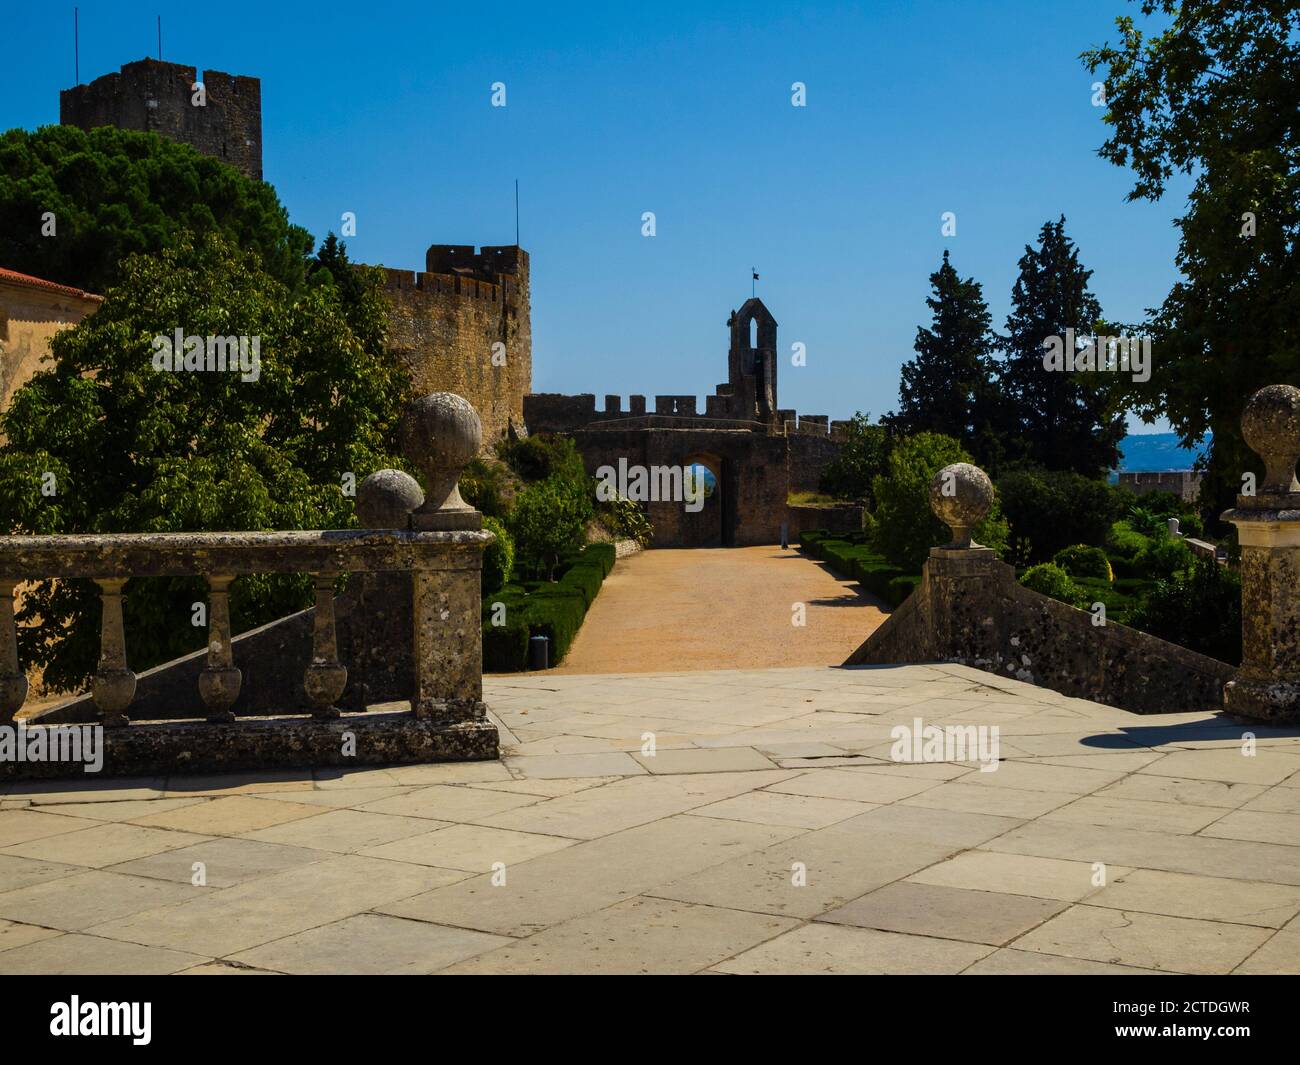 Exterior view of Templar castle and the Convent of the Order of Christ, Tomar, Portugal Stock Photo